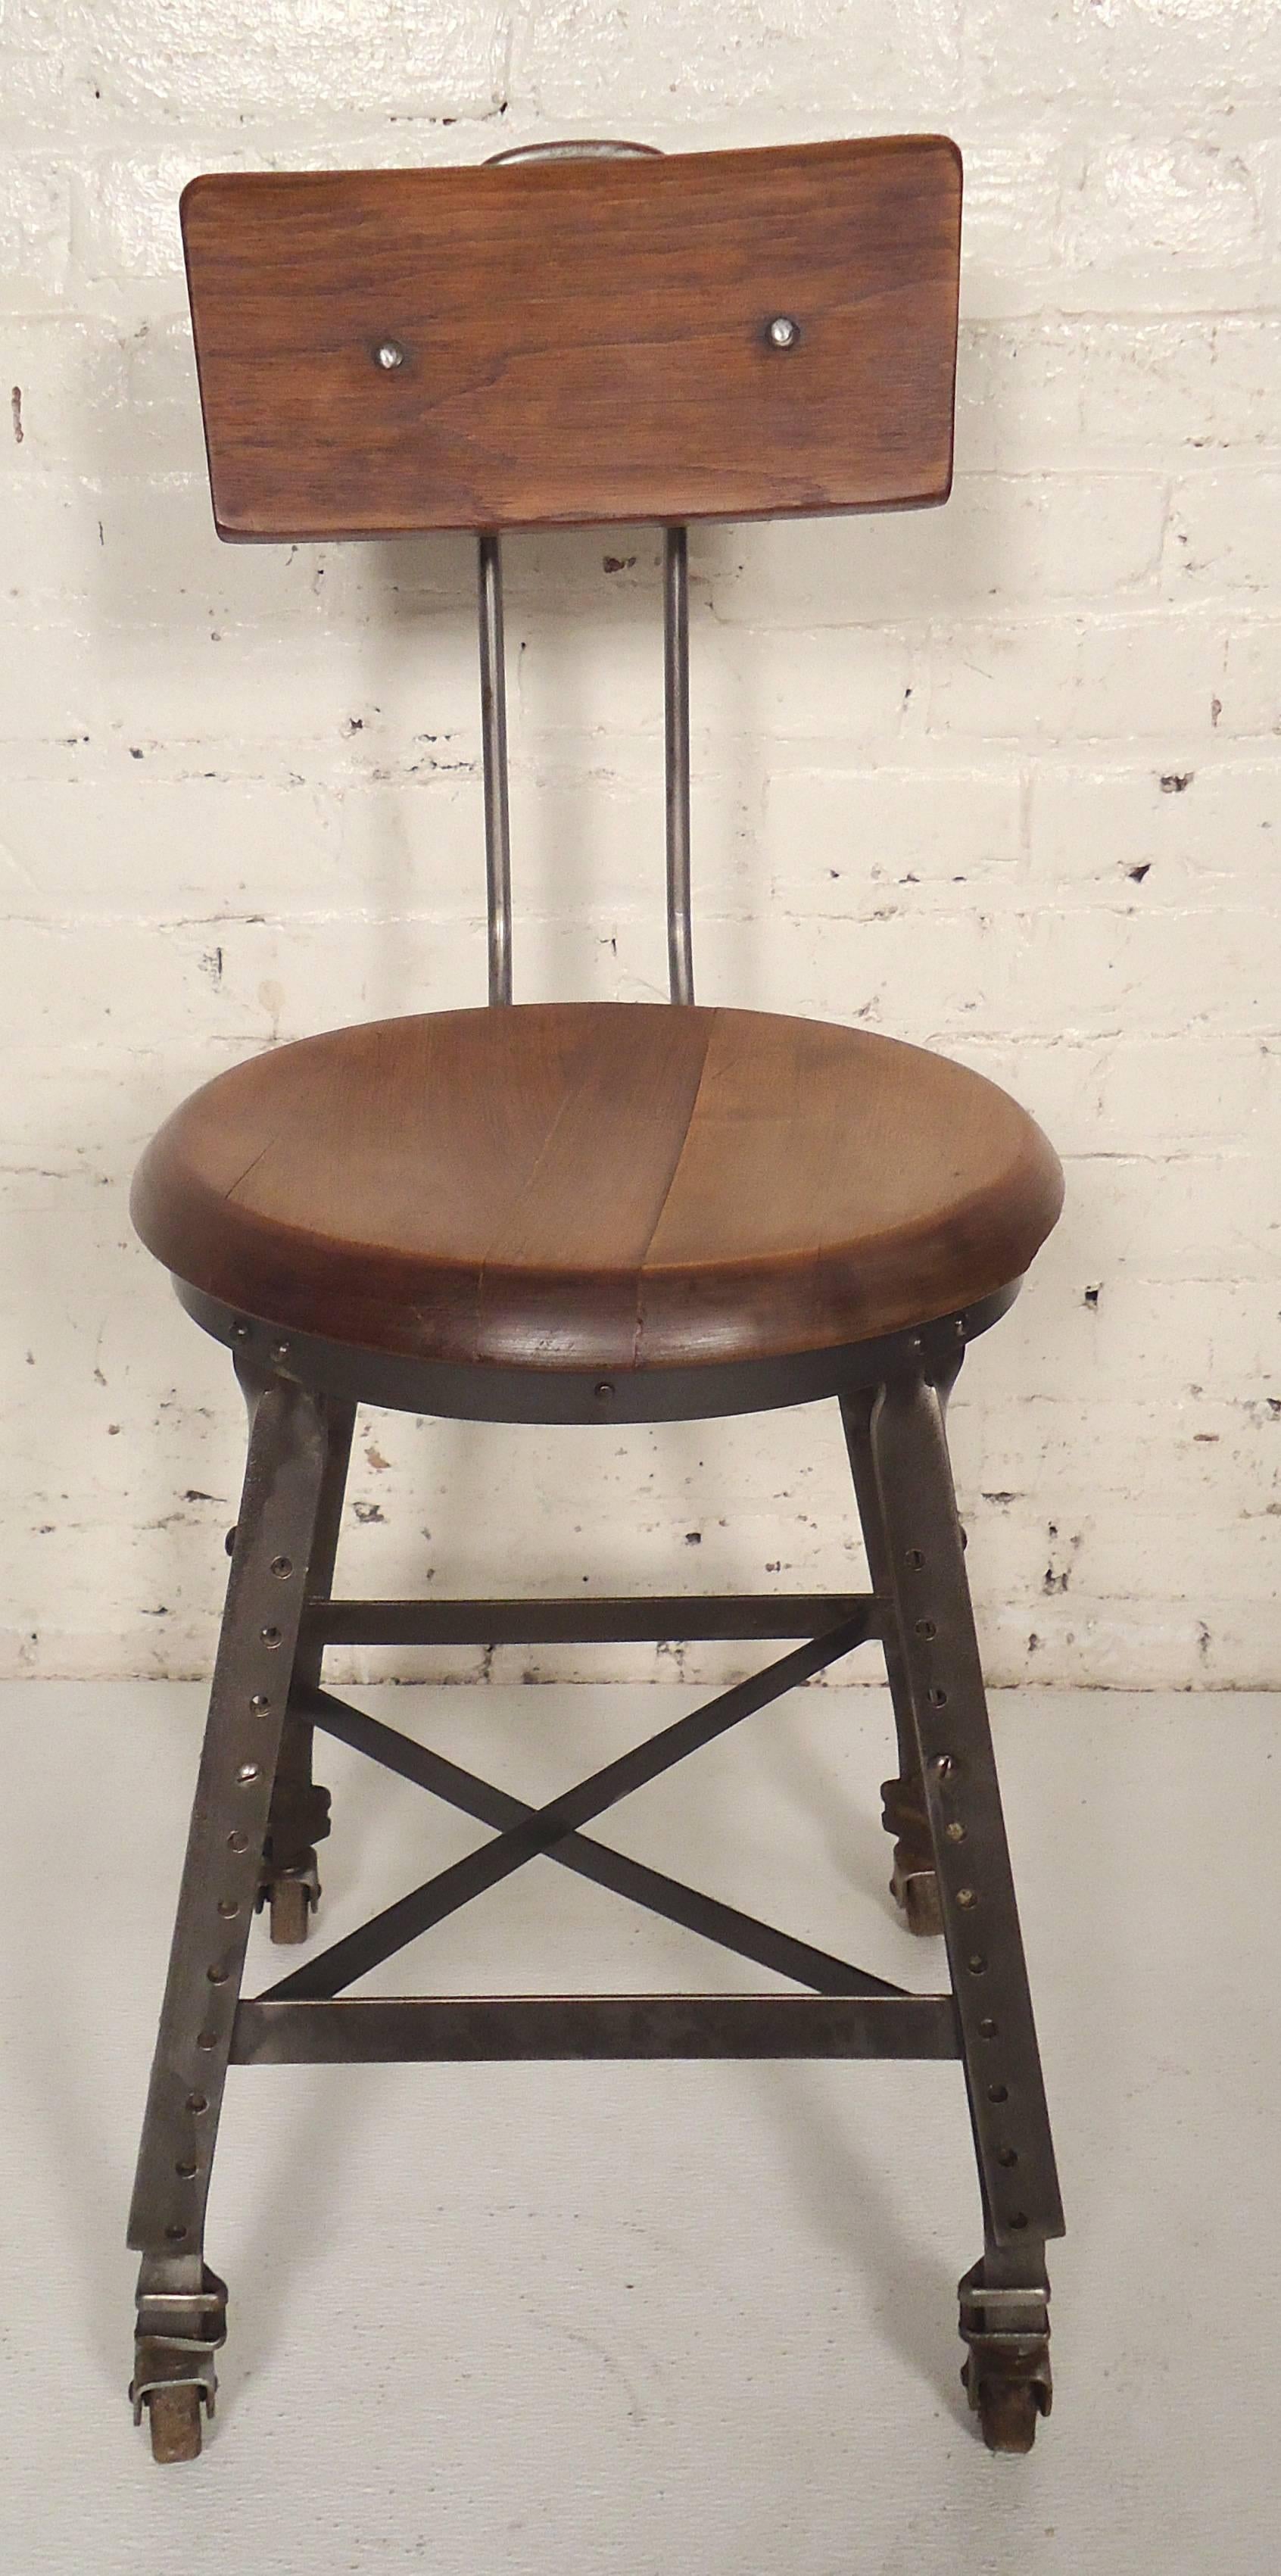 Single Industrial style rolling stool with wood seat and back. Unique size with Toledo Company look.

(Please confirm item location NY or NJ with dealer).
   